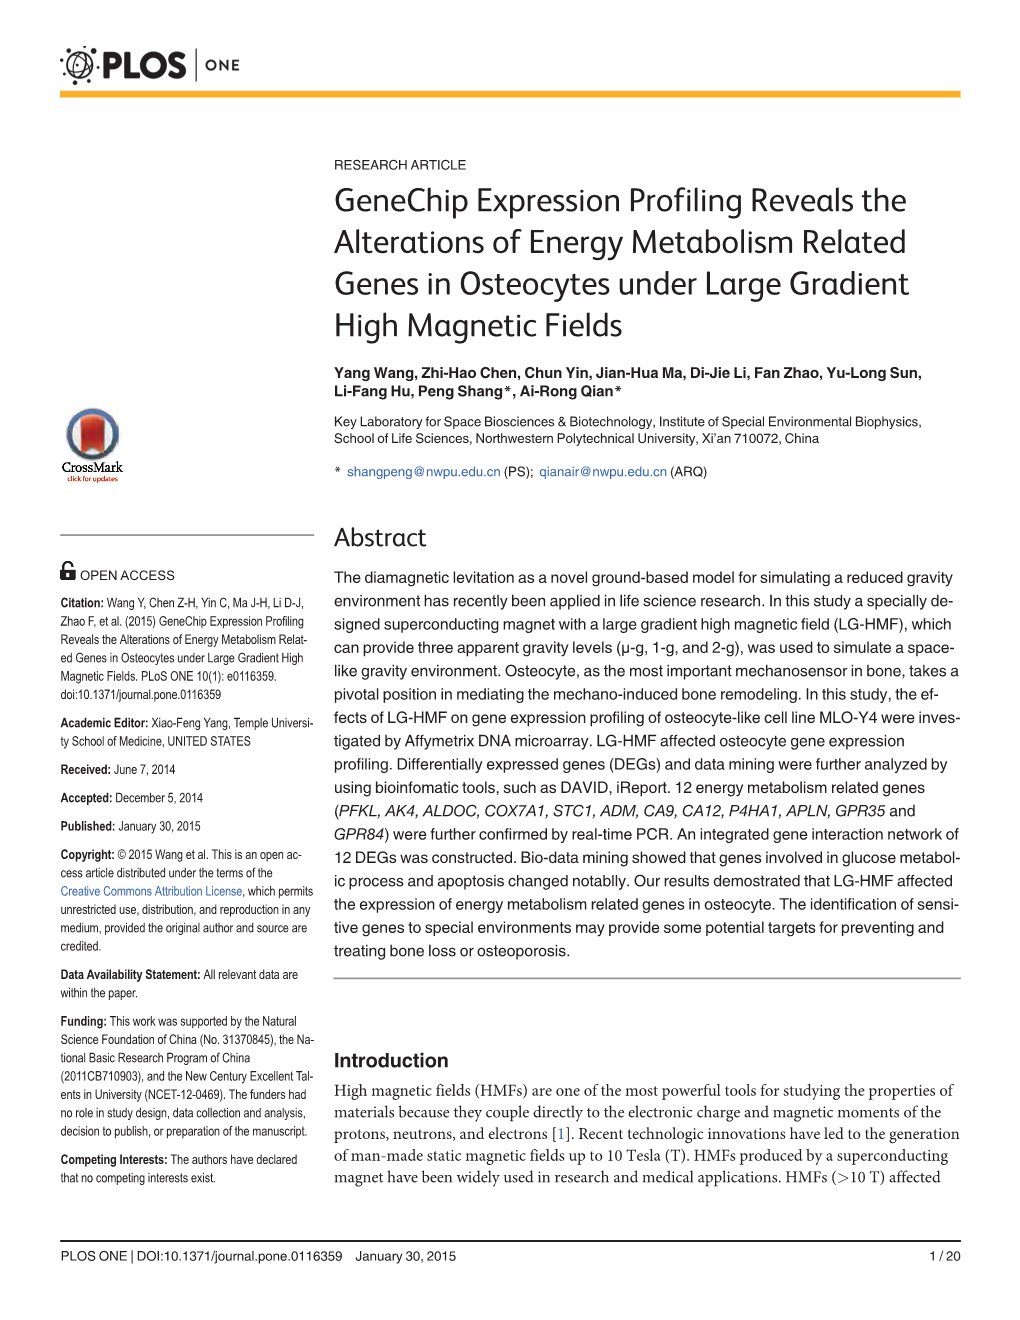 Genechip Expression Profiling Reveals the Alterations of Energy Metabolism Related Genes in Osteocytes Under Large Gradient High Magnetic Fields